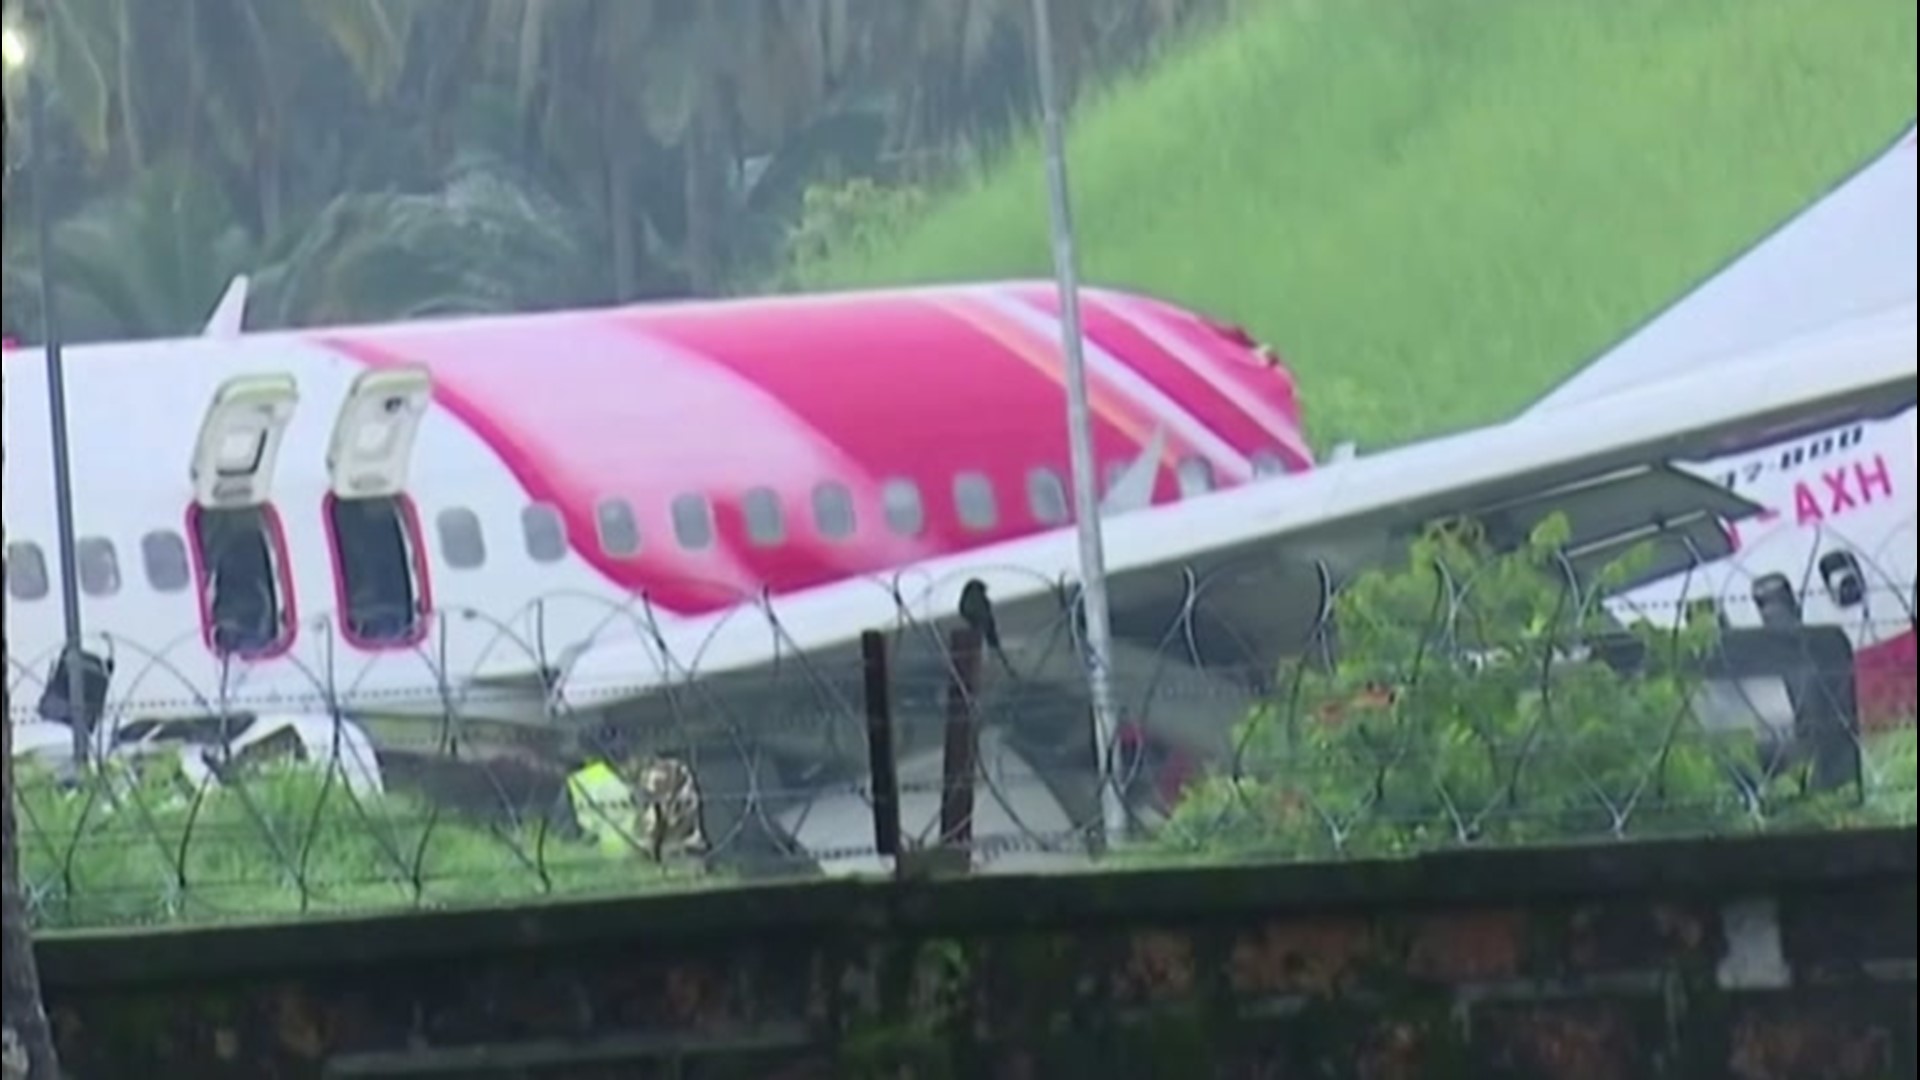 A plane crashed in heavy rainfall in Kozhikode, India, causing at least 18 fatalities on Aug. 7. This is the scene of the wreckage the following day.